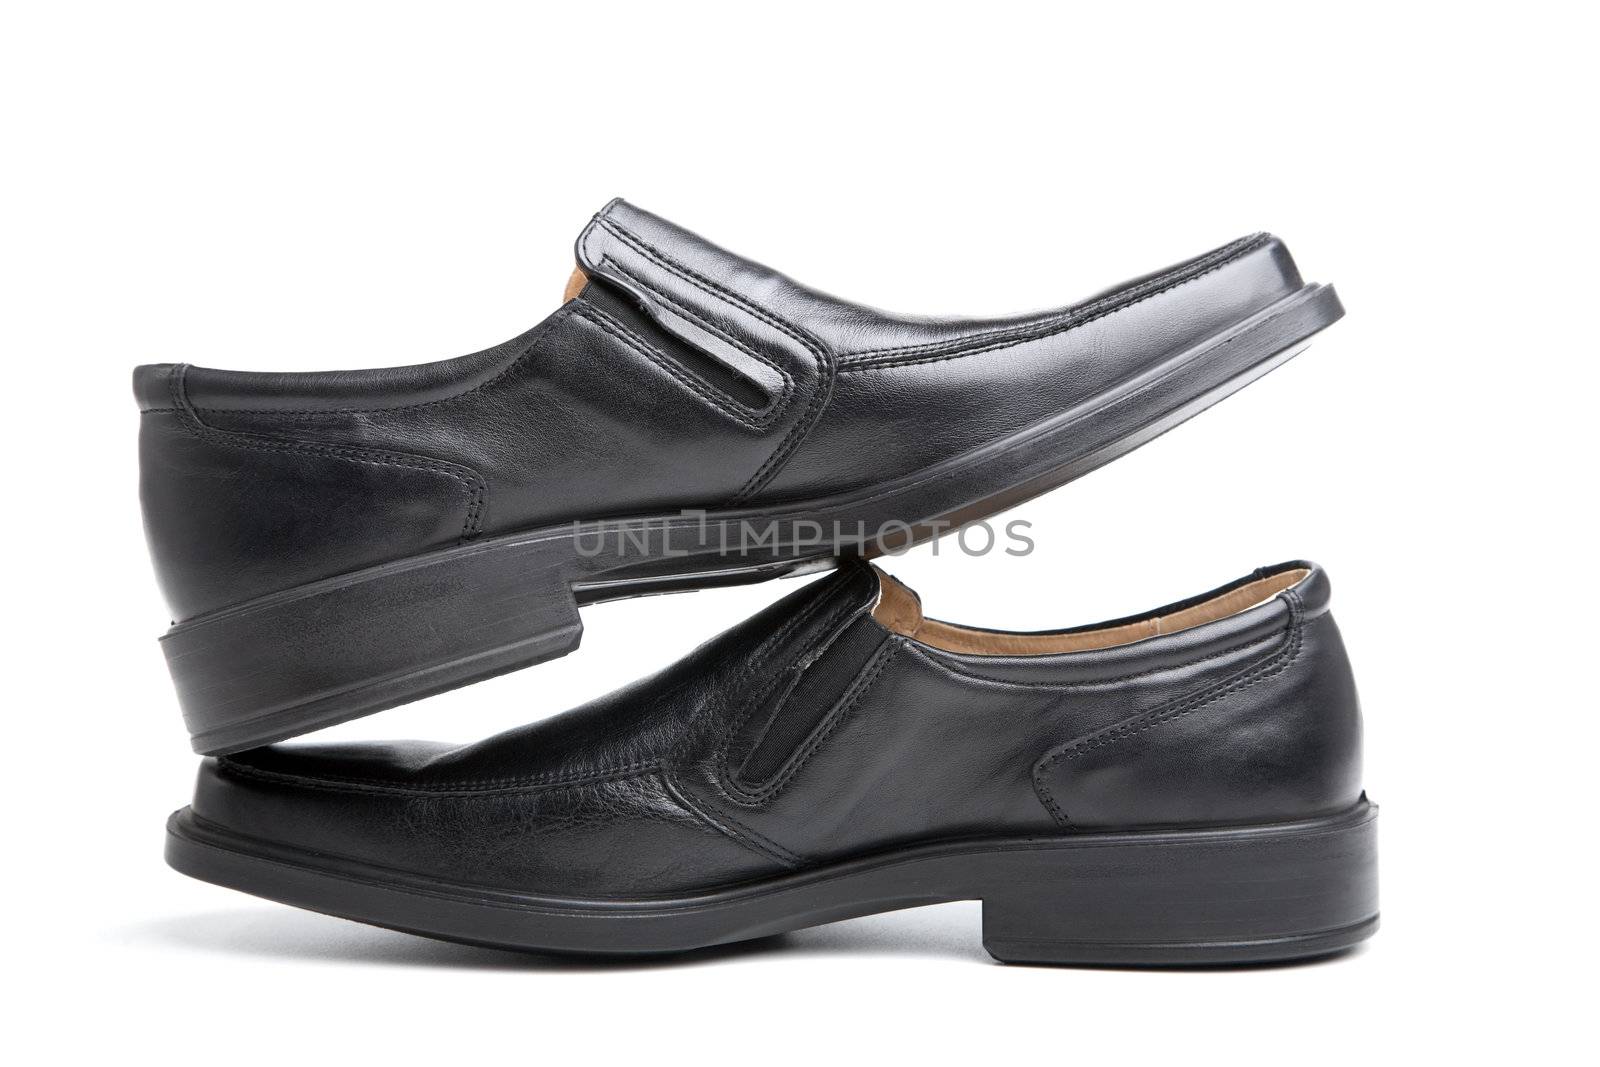 Pair of black man's shoes by alarich